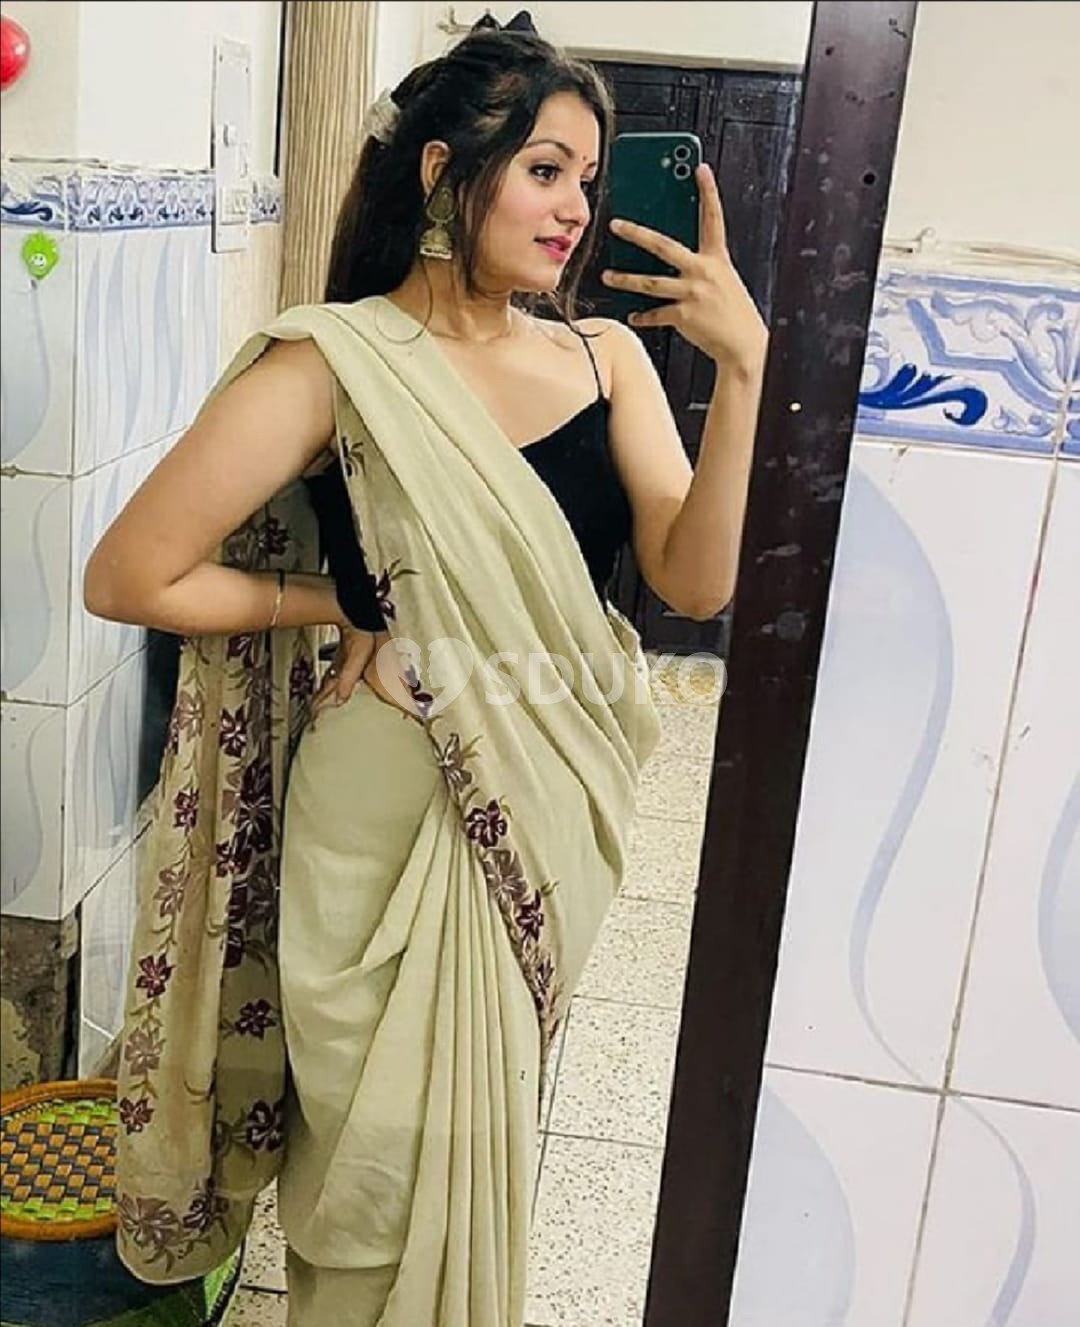 BEST PROFILE AVAILABLE IN HOSUR 100% SAFE AND SECURE TODAY LOW PRICE UNLIMITED ENJOY HOT COLLEGE GIRL HOUSEWIFE AUNTIES 